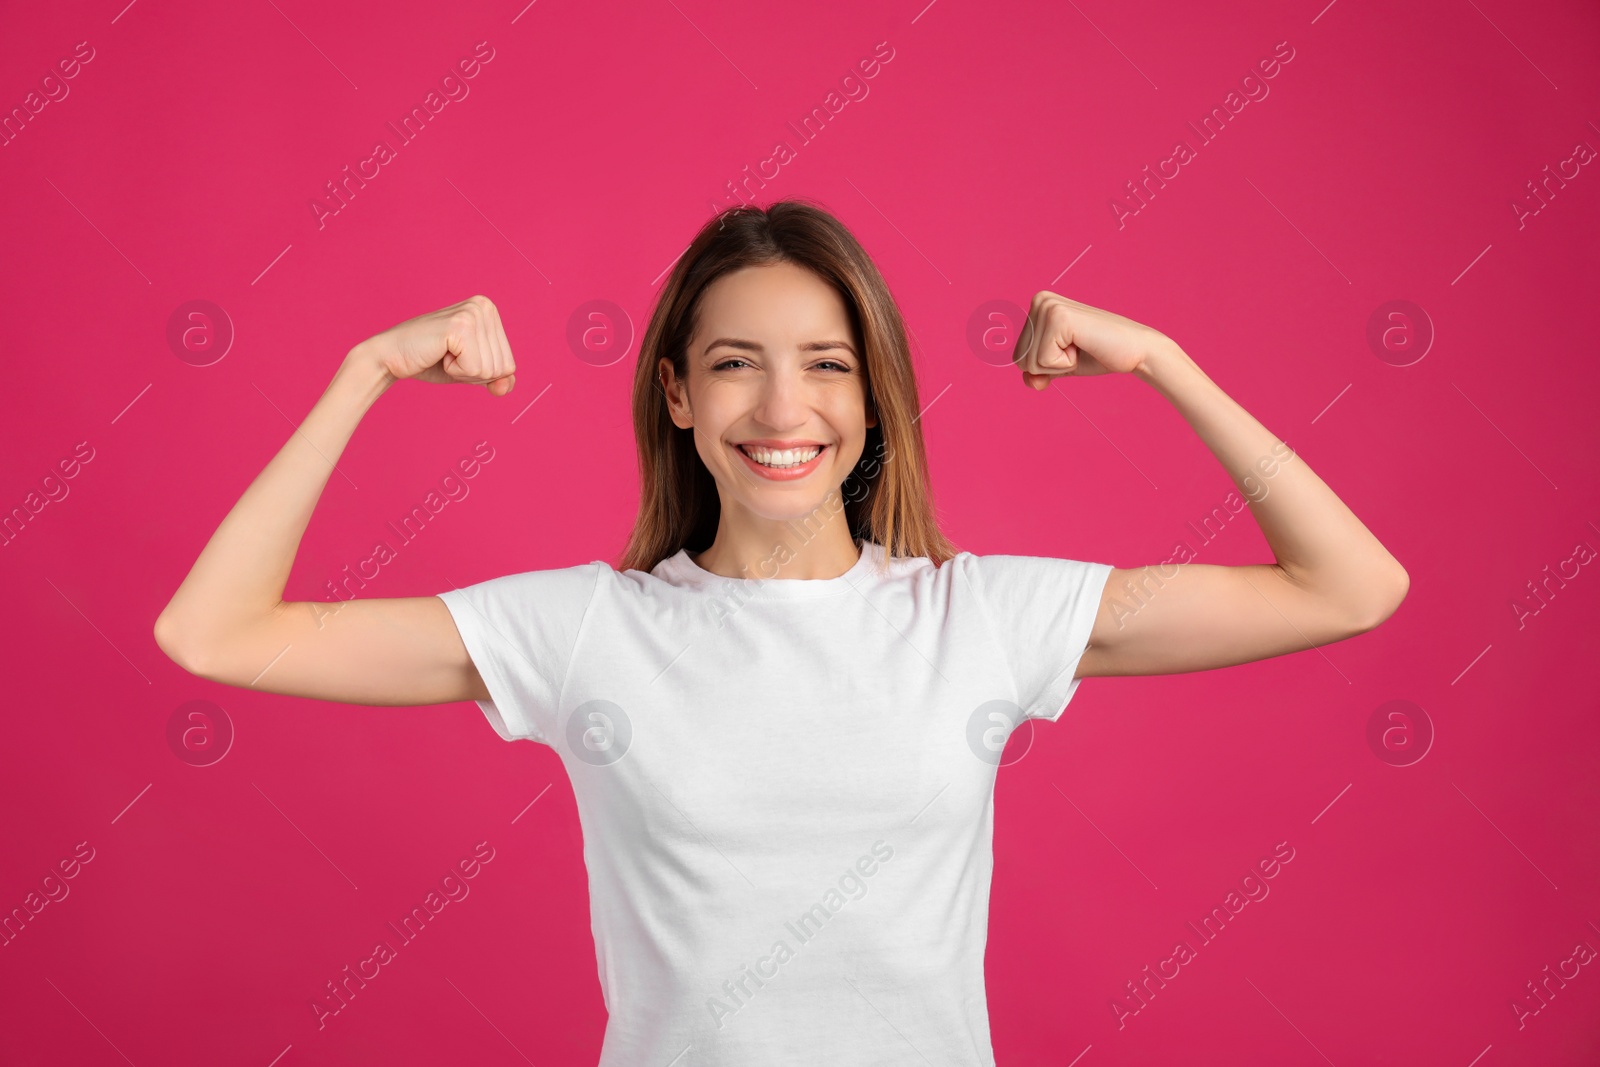 Photo of Strong woman as symbol of girl power on pink background. 8 March concept